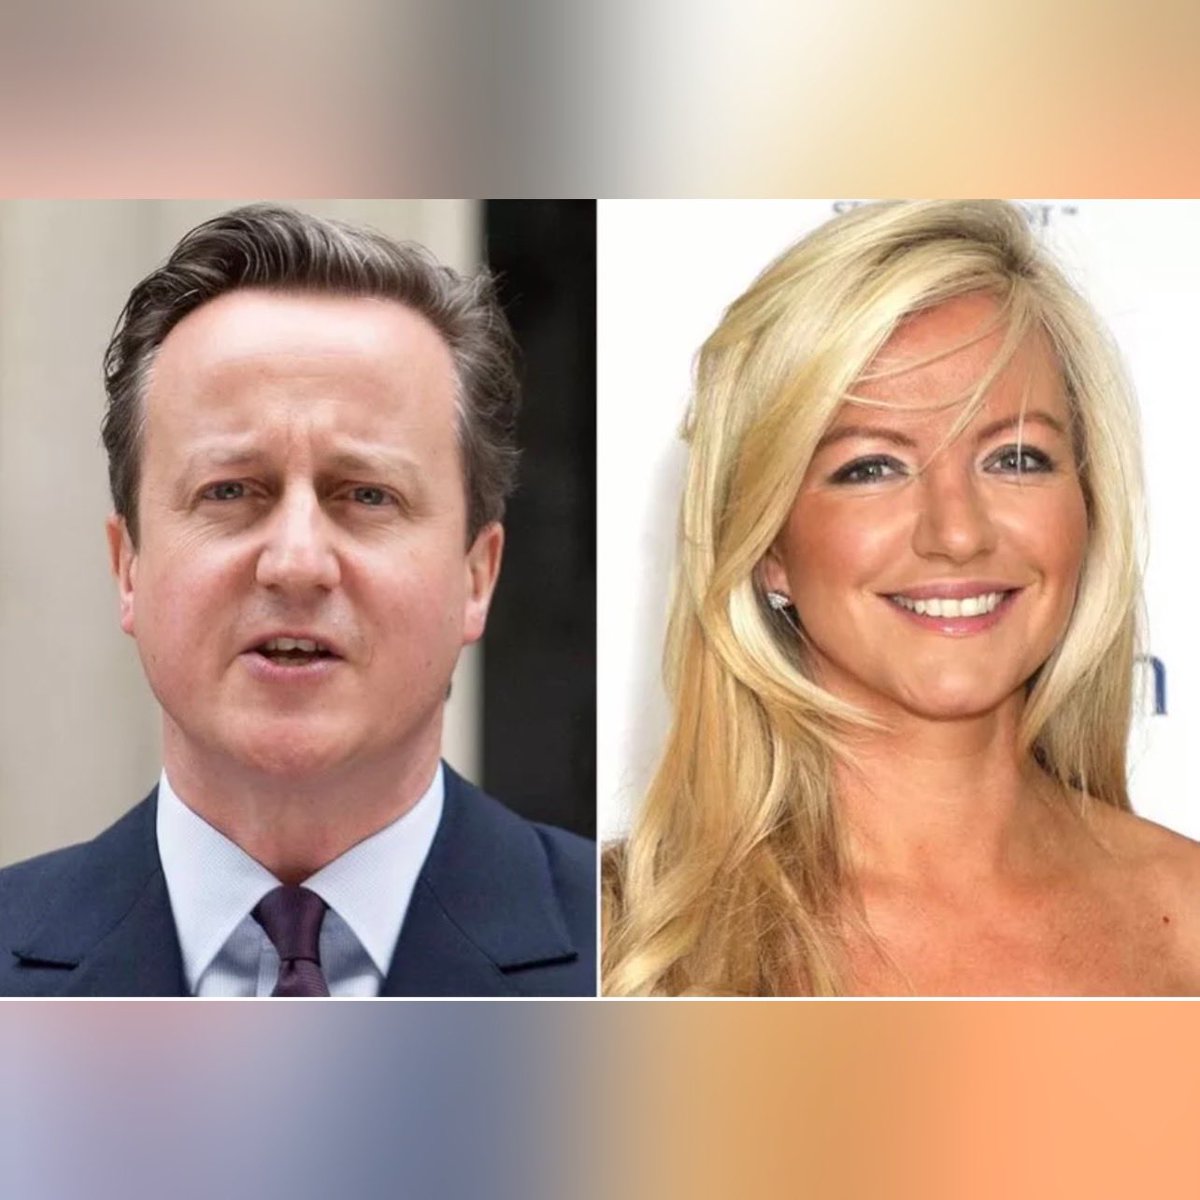 David Cameron appointed Michelle Mone to the House of Lords. Nobody knows why. But we do know that her spokesman admitted last wk, after multiple denials, that she was the intermediary for contracts for PPE MEDPRO. Can someone ask him his opinion on this matter? #Reshuffle